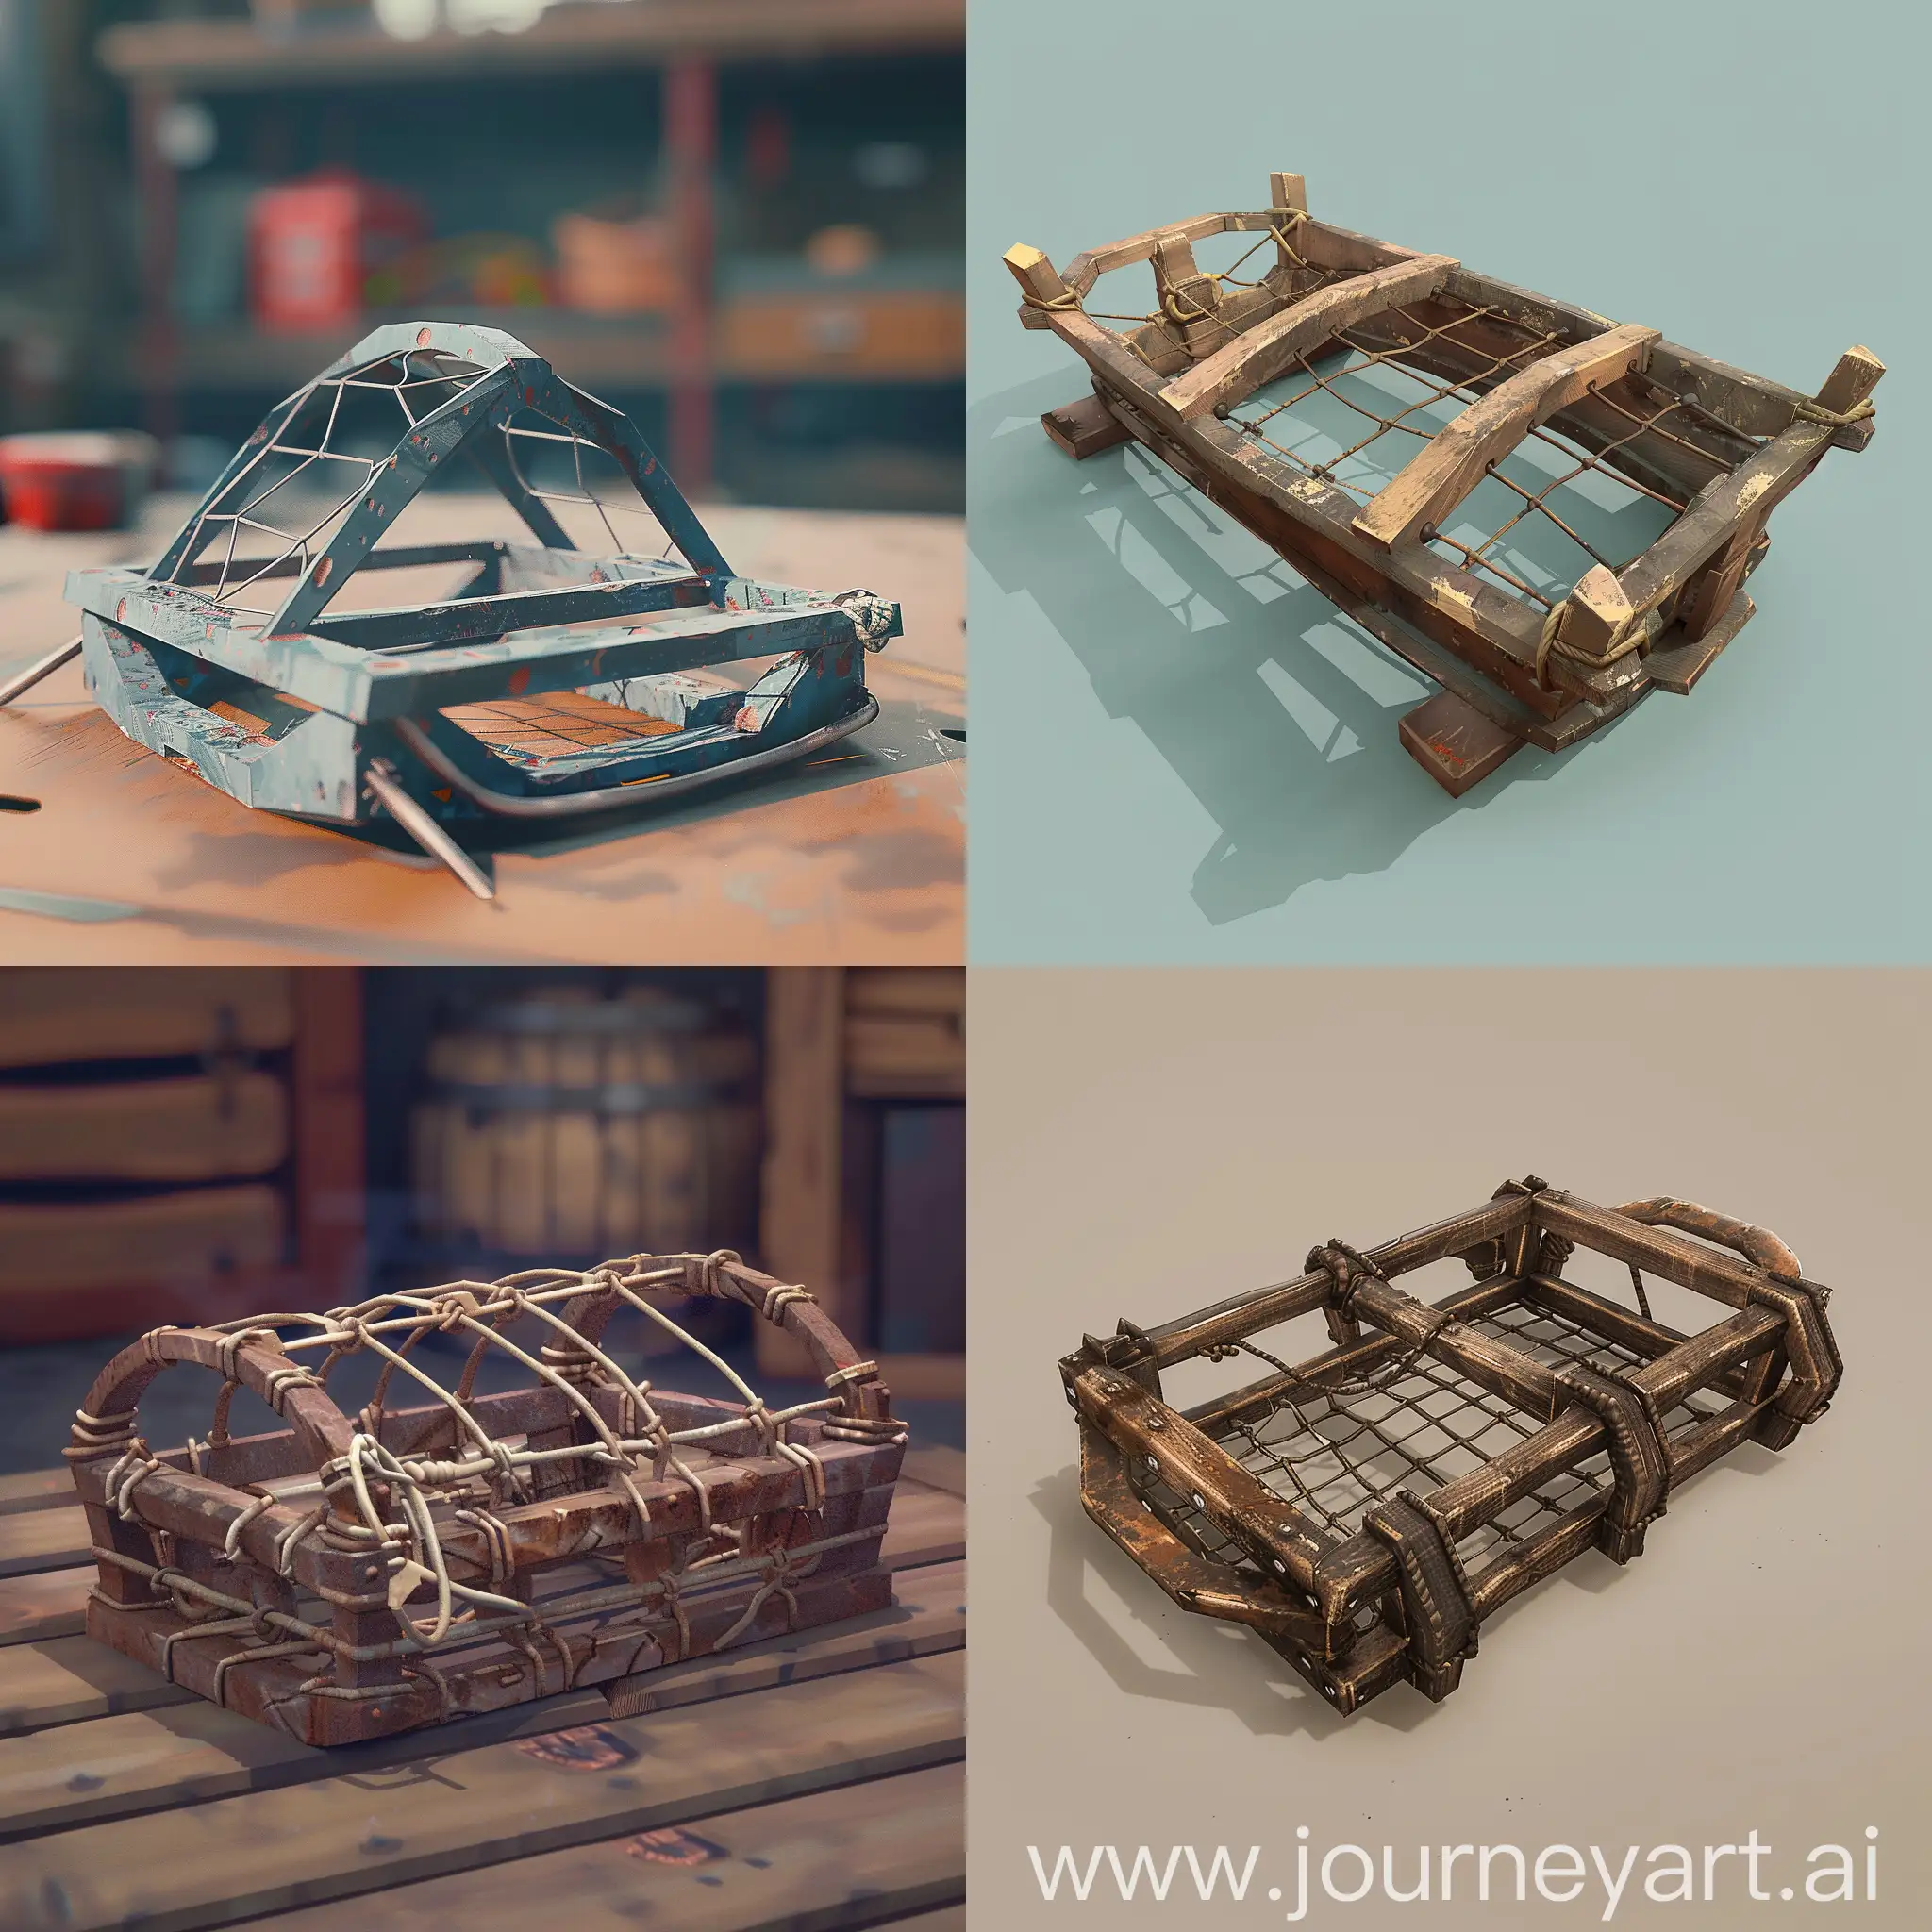 Vintage-Low-Poly-Lobster-Trap-Nostalgic-3D-Model-for-Retro-Gaming-Enthusiasts